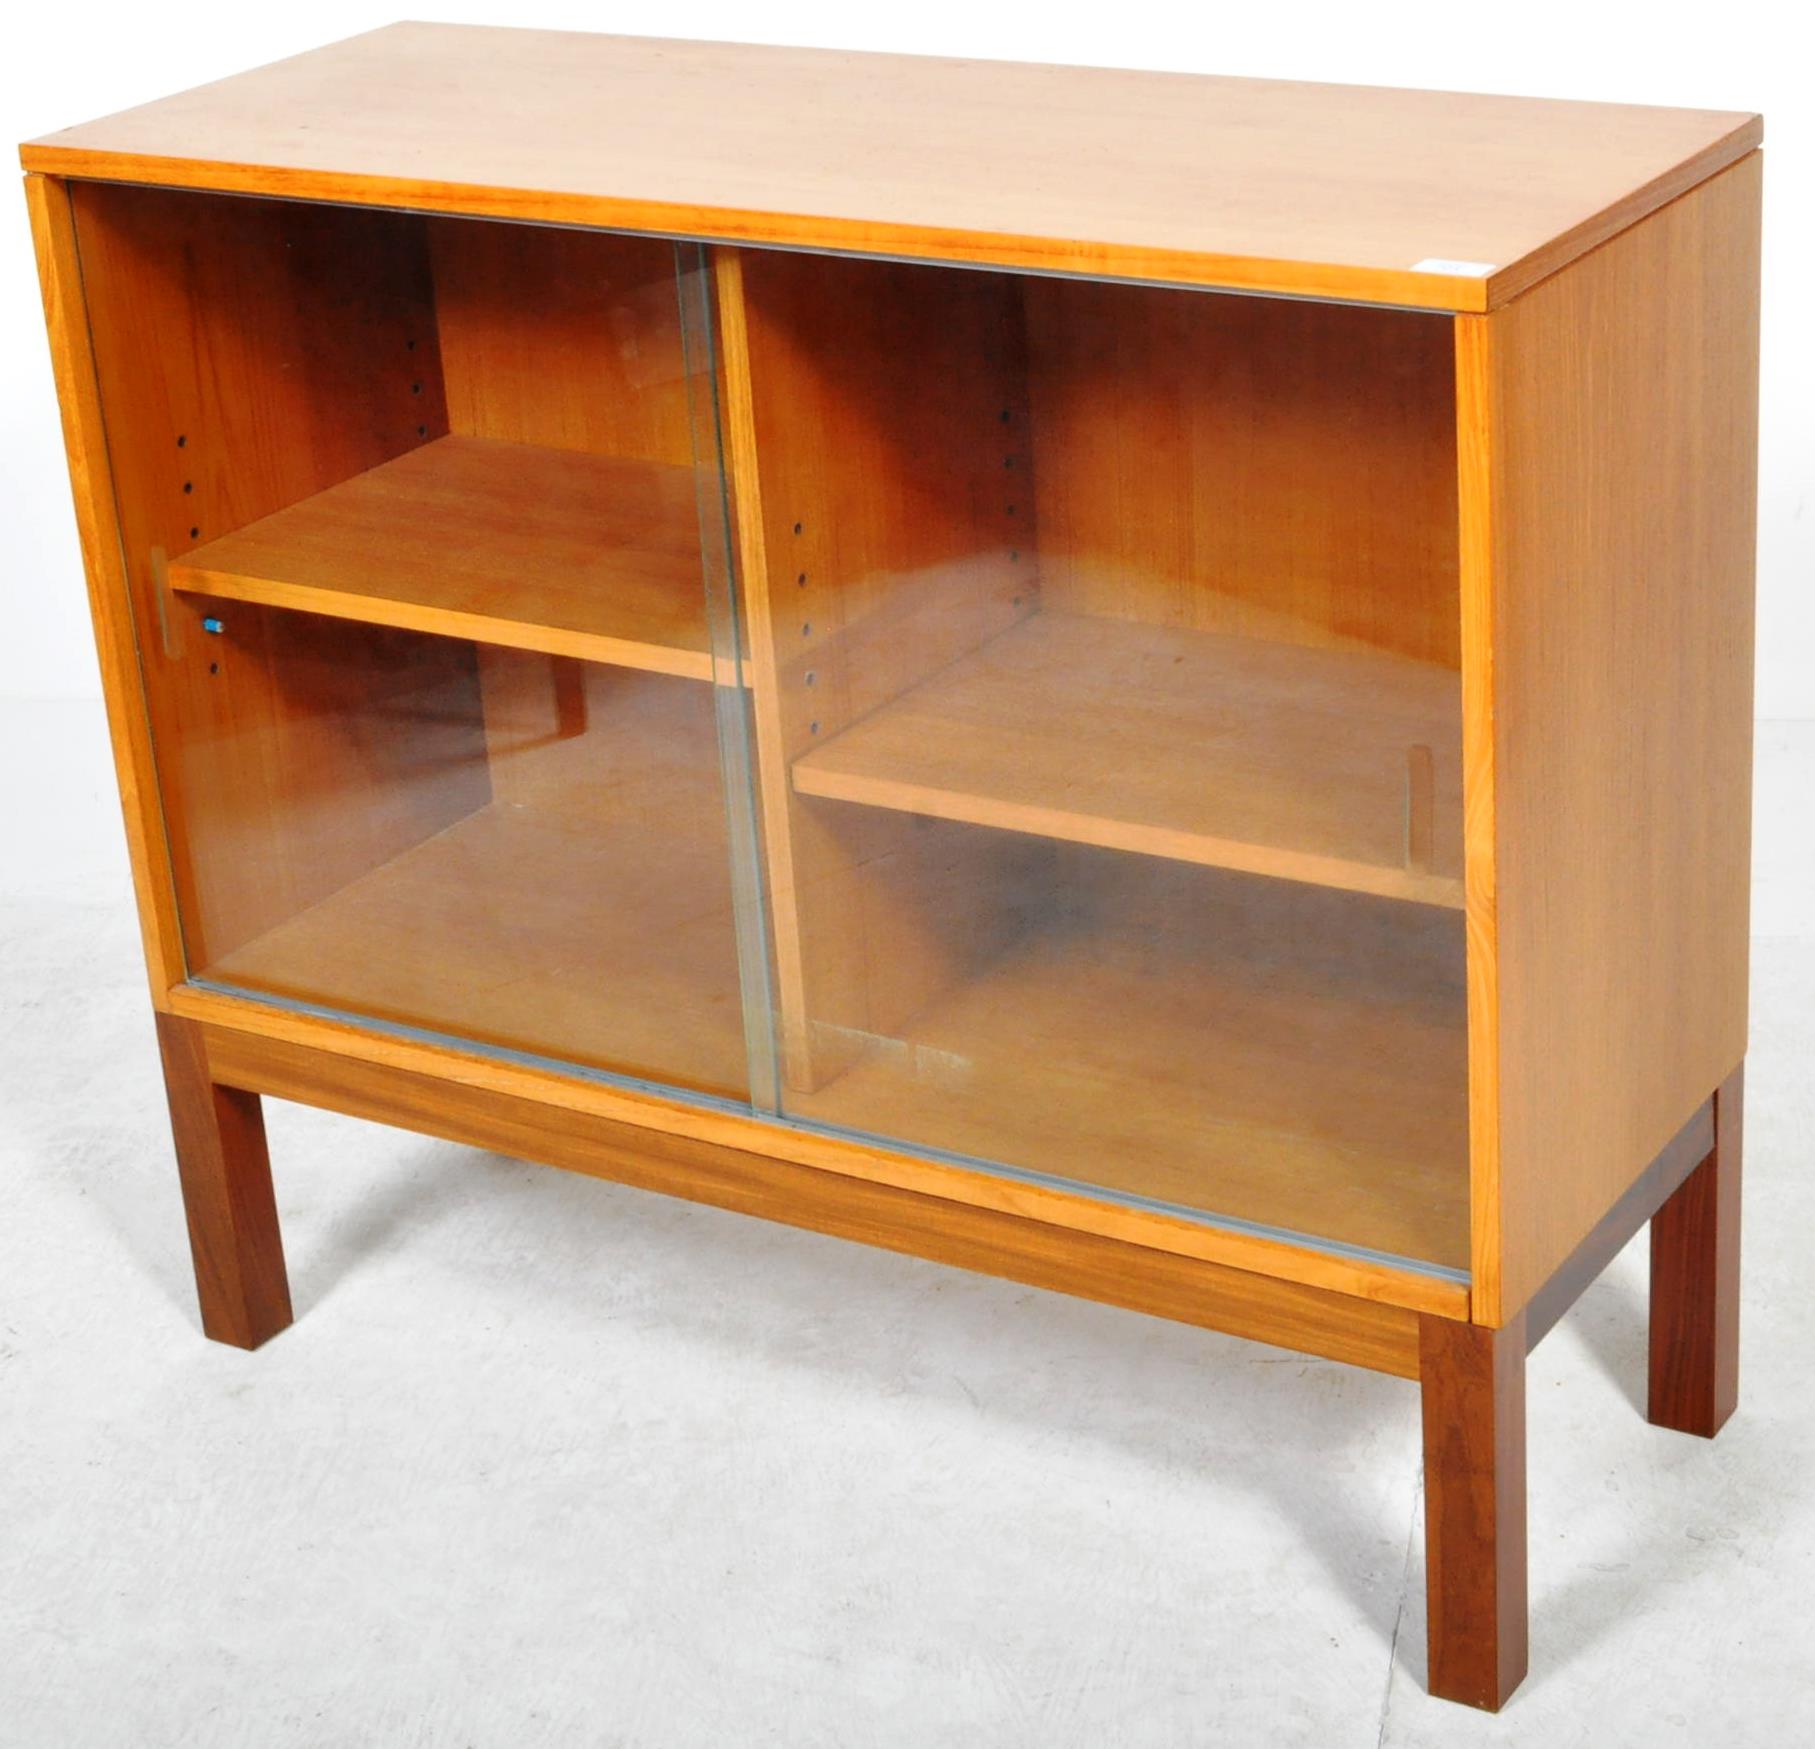 OFFICE FURNITURE - GOLD OAK BOOKCASE / DISPLAY CABINET - Image 2 of 5